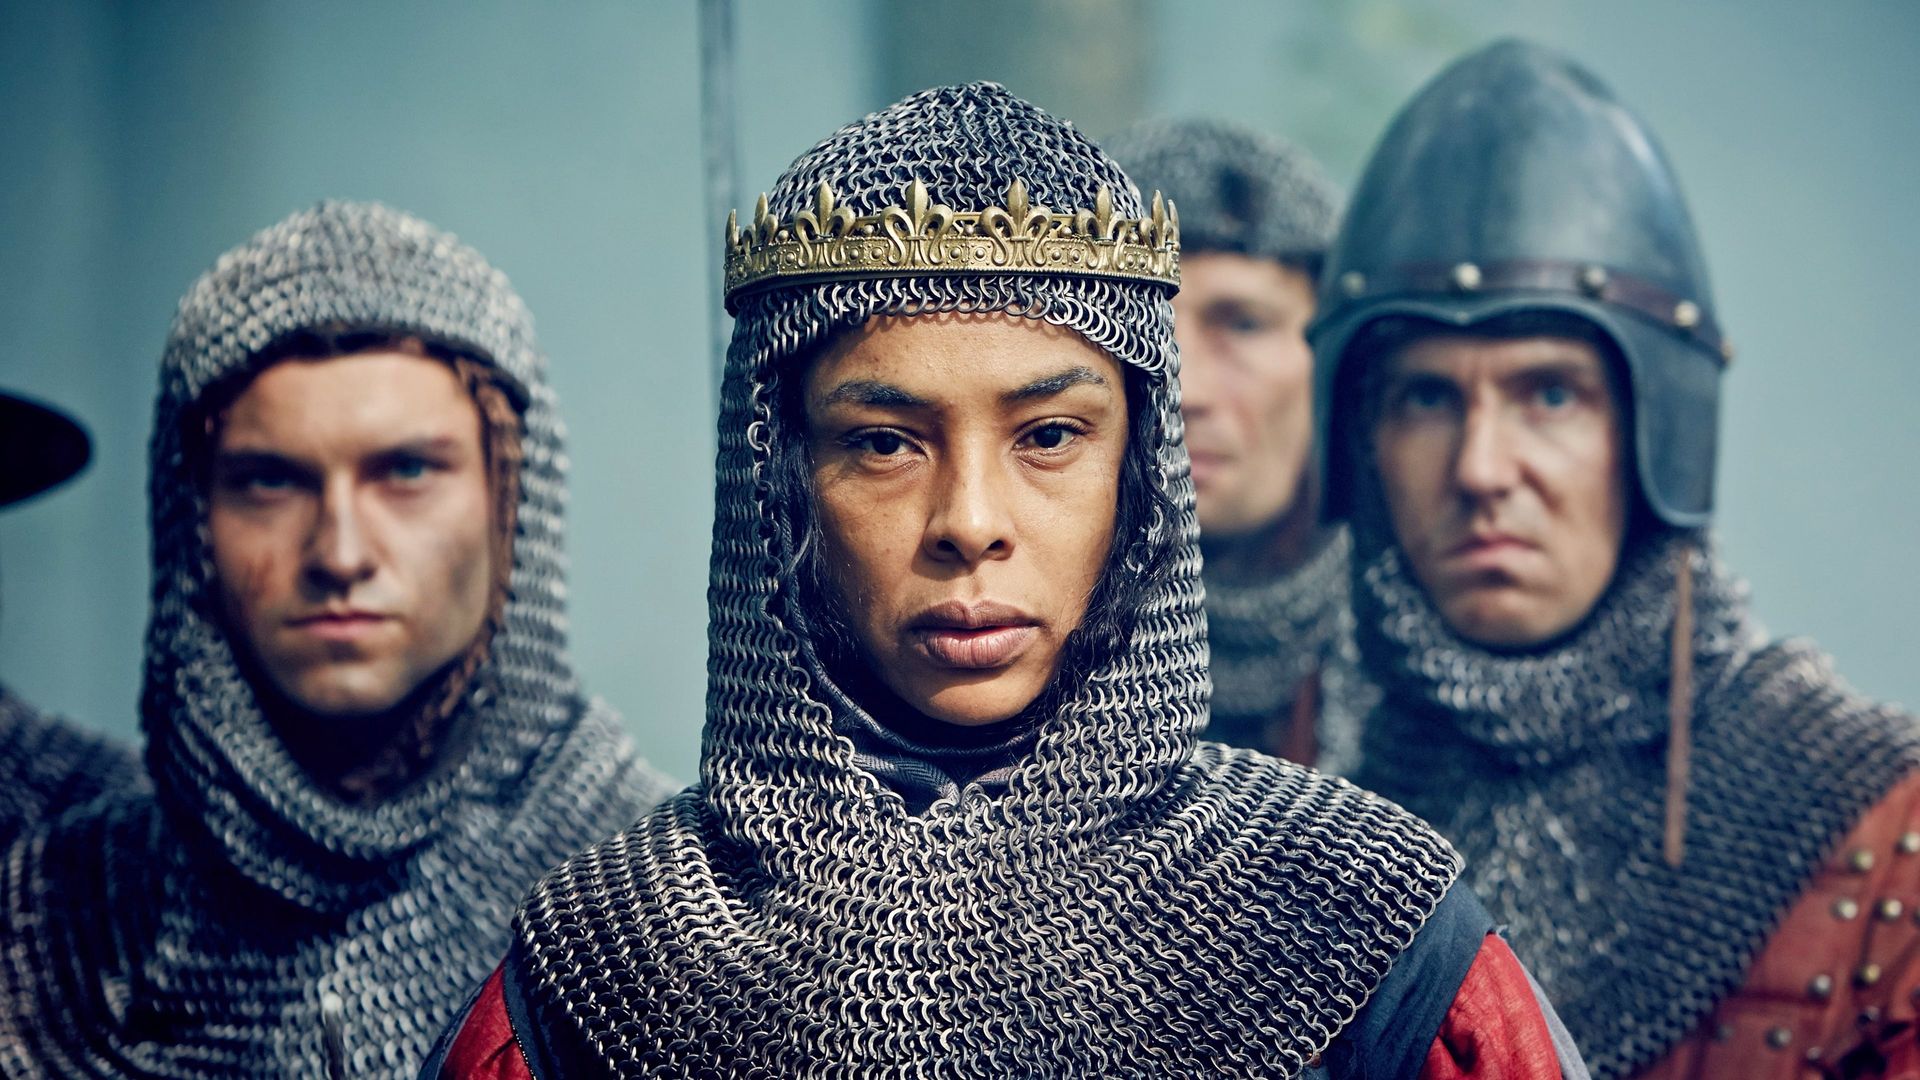 The Hollow Crown background